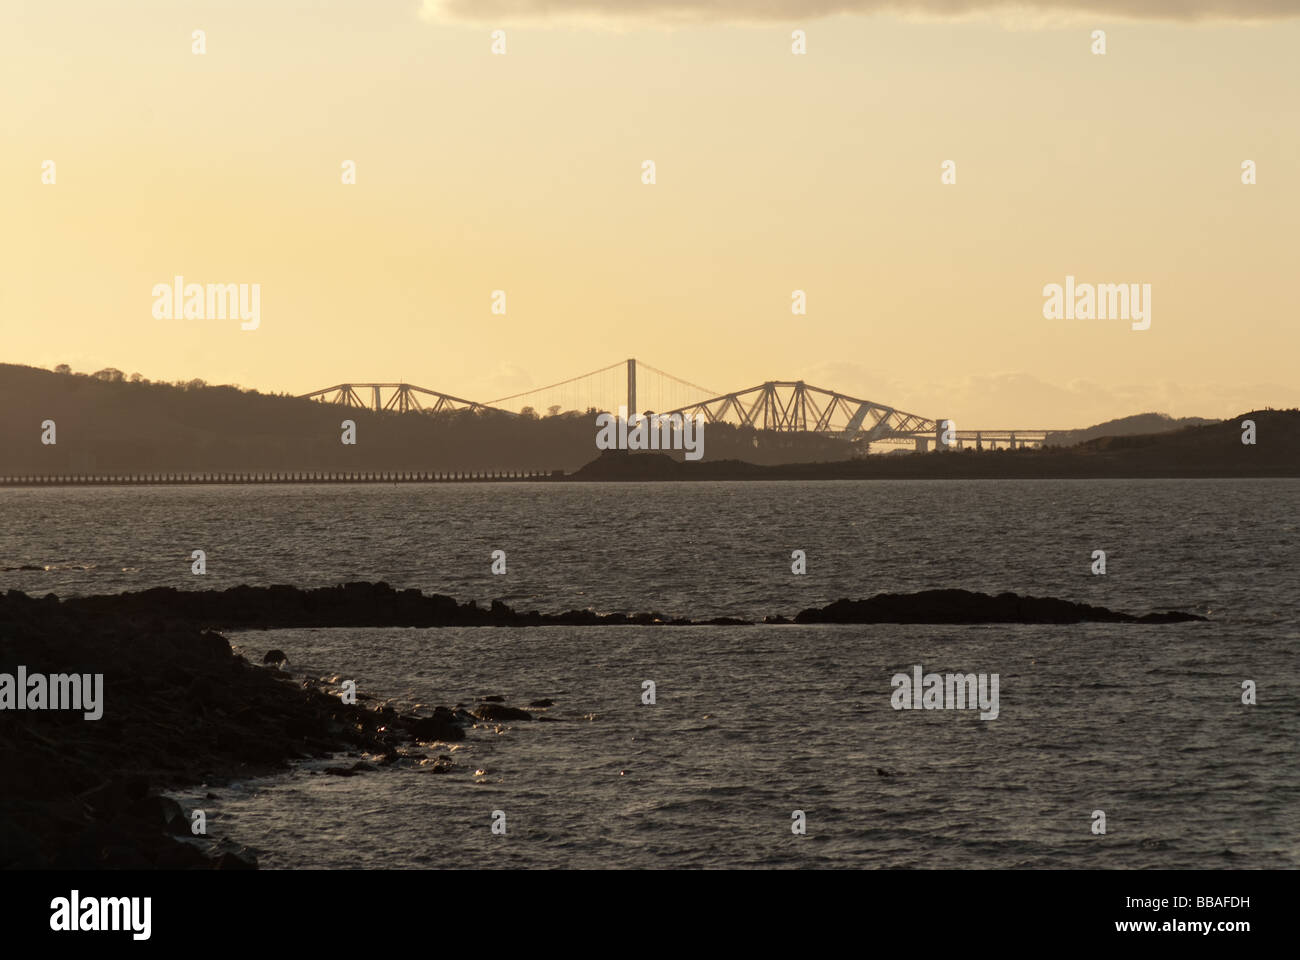 Forth road and rail bridge at dusk from Granton Harbour, Leith, Edinbugh, Scotland with rocks in the foreground Stock Photo